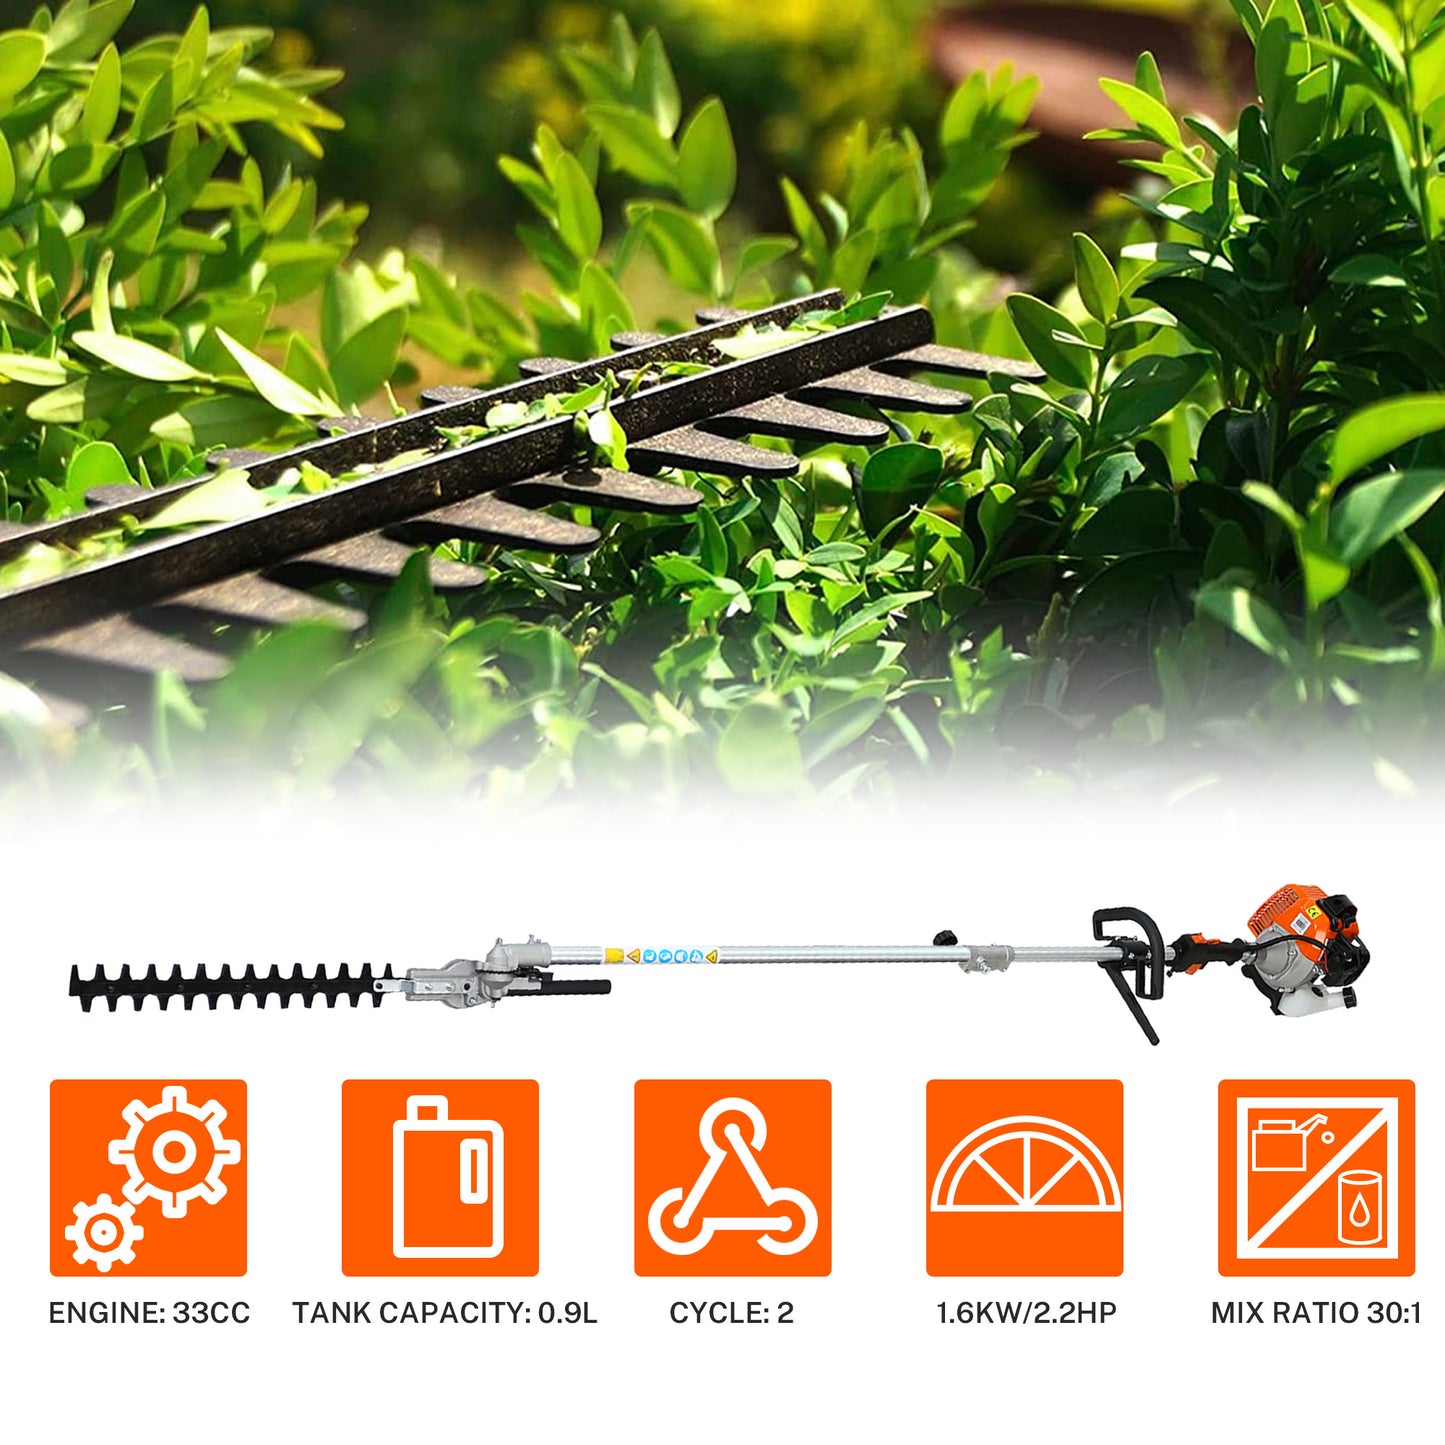 4-in-1 Grass Trimmer Weed Eater Combos, 33CC 2-Cycle Full Crank Shaft Gas Powered Weed Eater with Gas Pole Saw, Hedge Trimmer and Brush Cutter, Grass Trimming Tool for Garden, Lawn Care, Y014